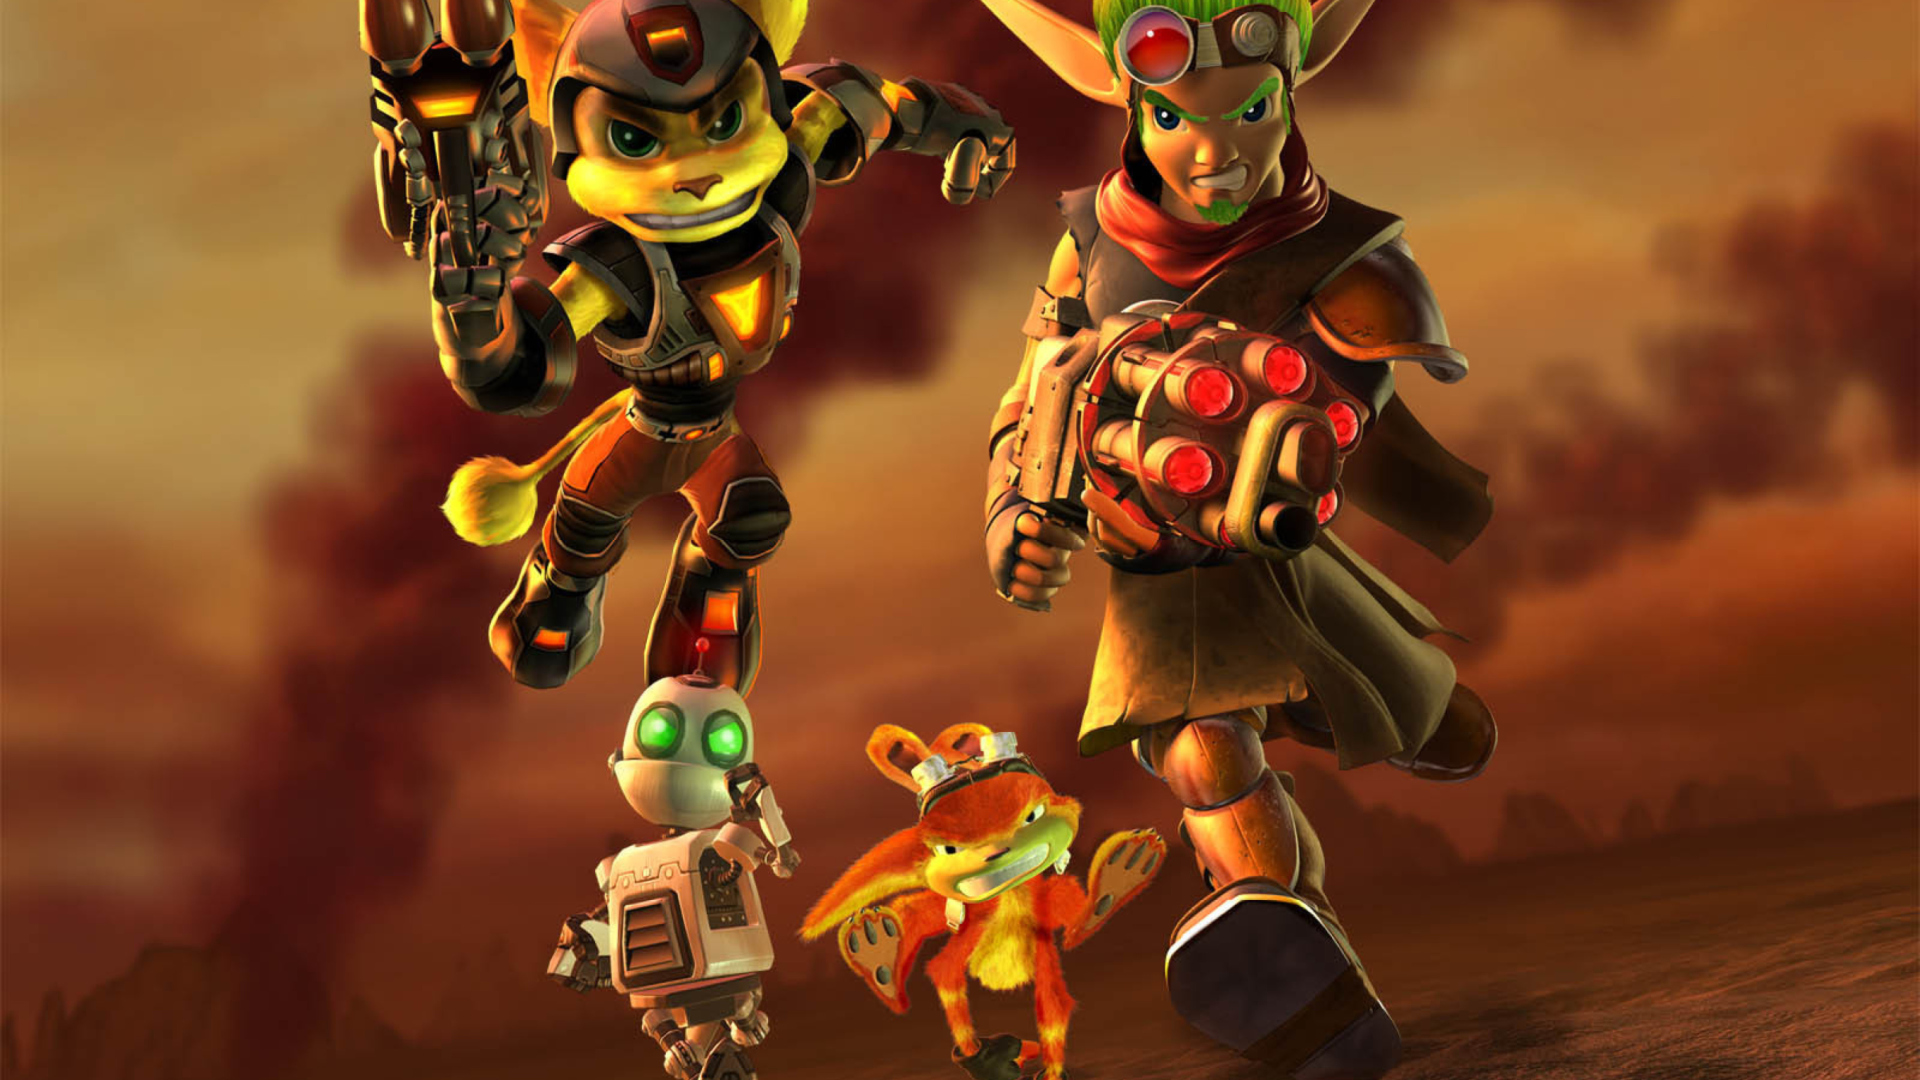 Jak and Daxter - Ratchet and Clank screenshot #1 1920x1080